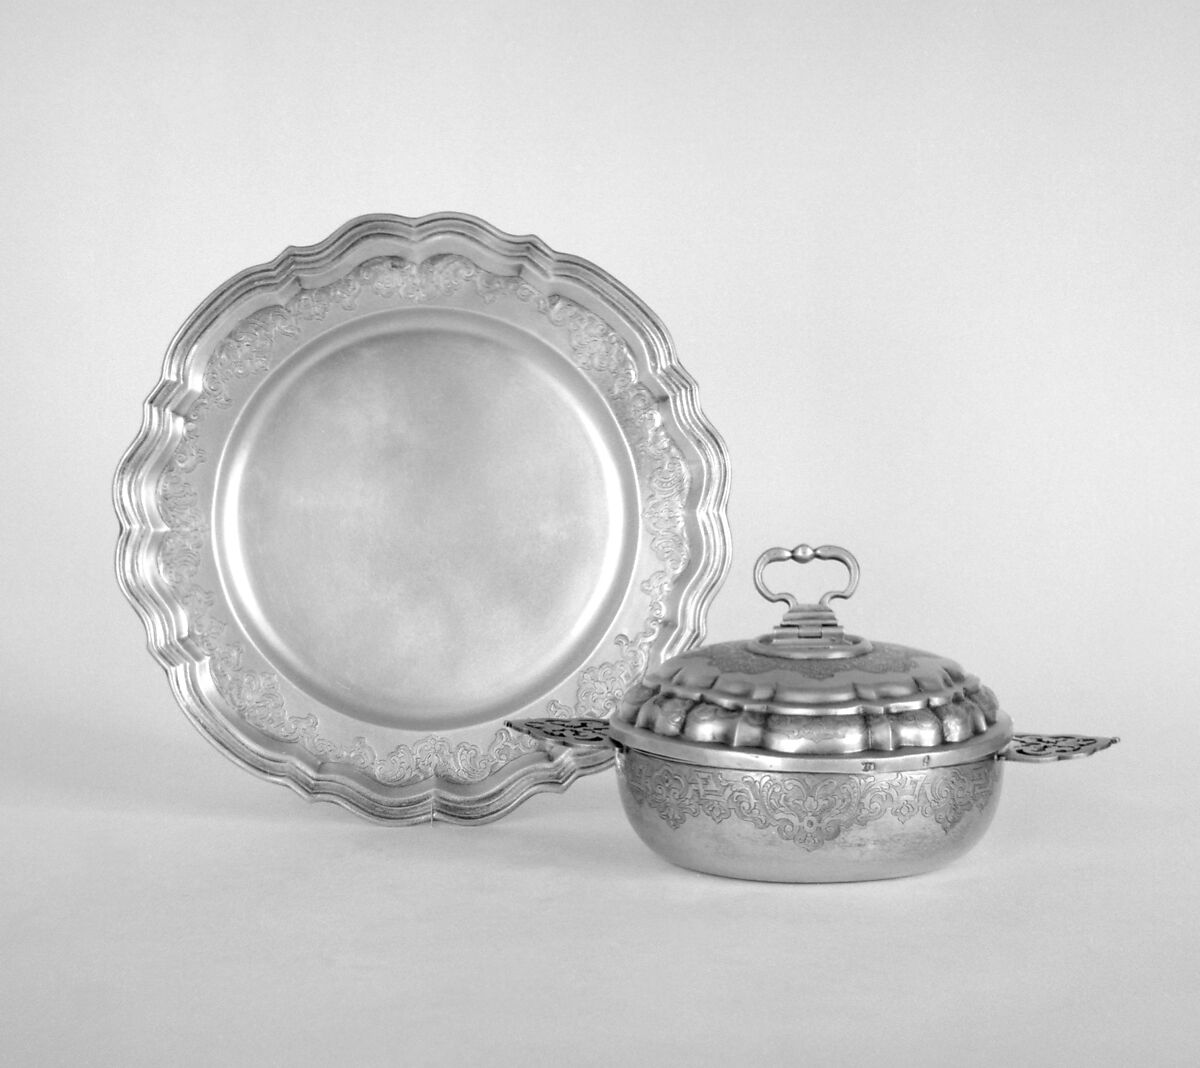 Écuelle with cover and stand, Silver gilt, German, Augsburg 